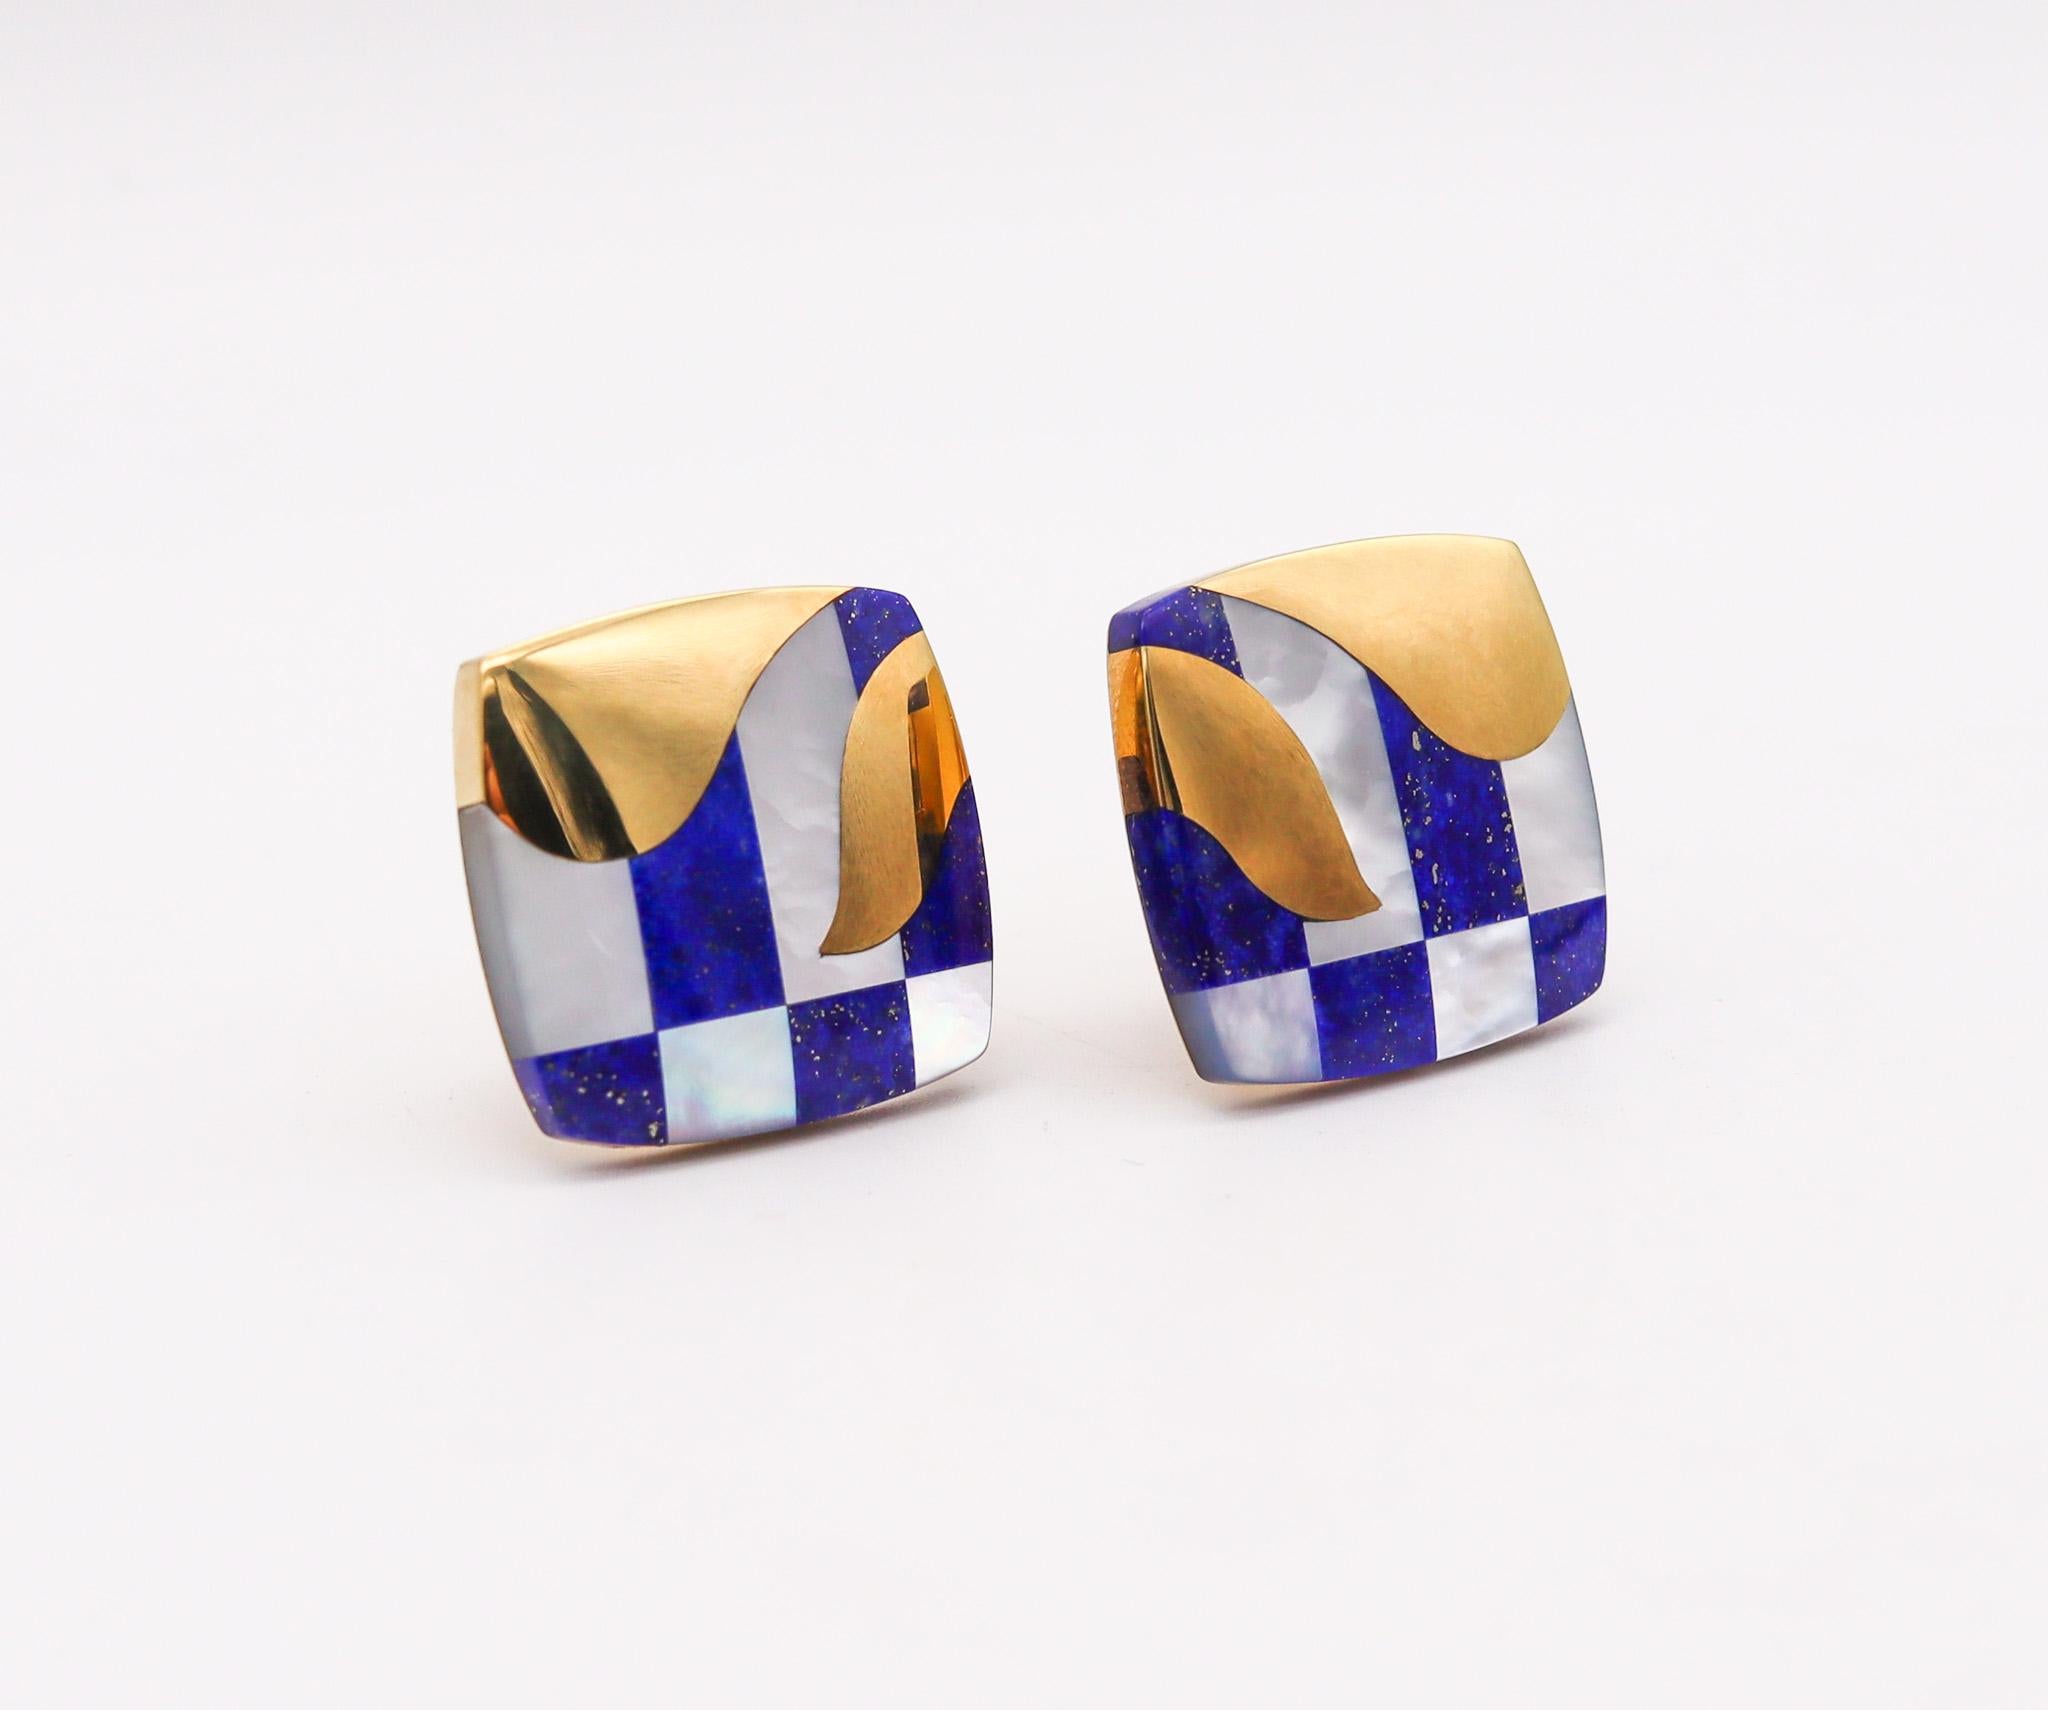 Inlaid geometric earrings designed by Angela Cummings for Tiffany & Co.

Wonderful pieces created in New York city by Angela Cummings at the Tiffany studios, back in the late 1970's. These square pair of inlaid clips earrings has been crafted in